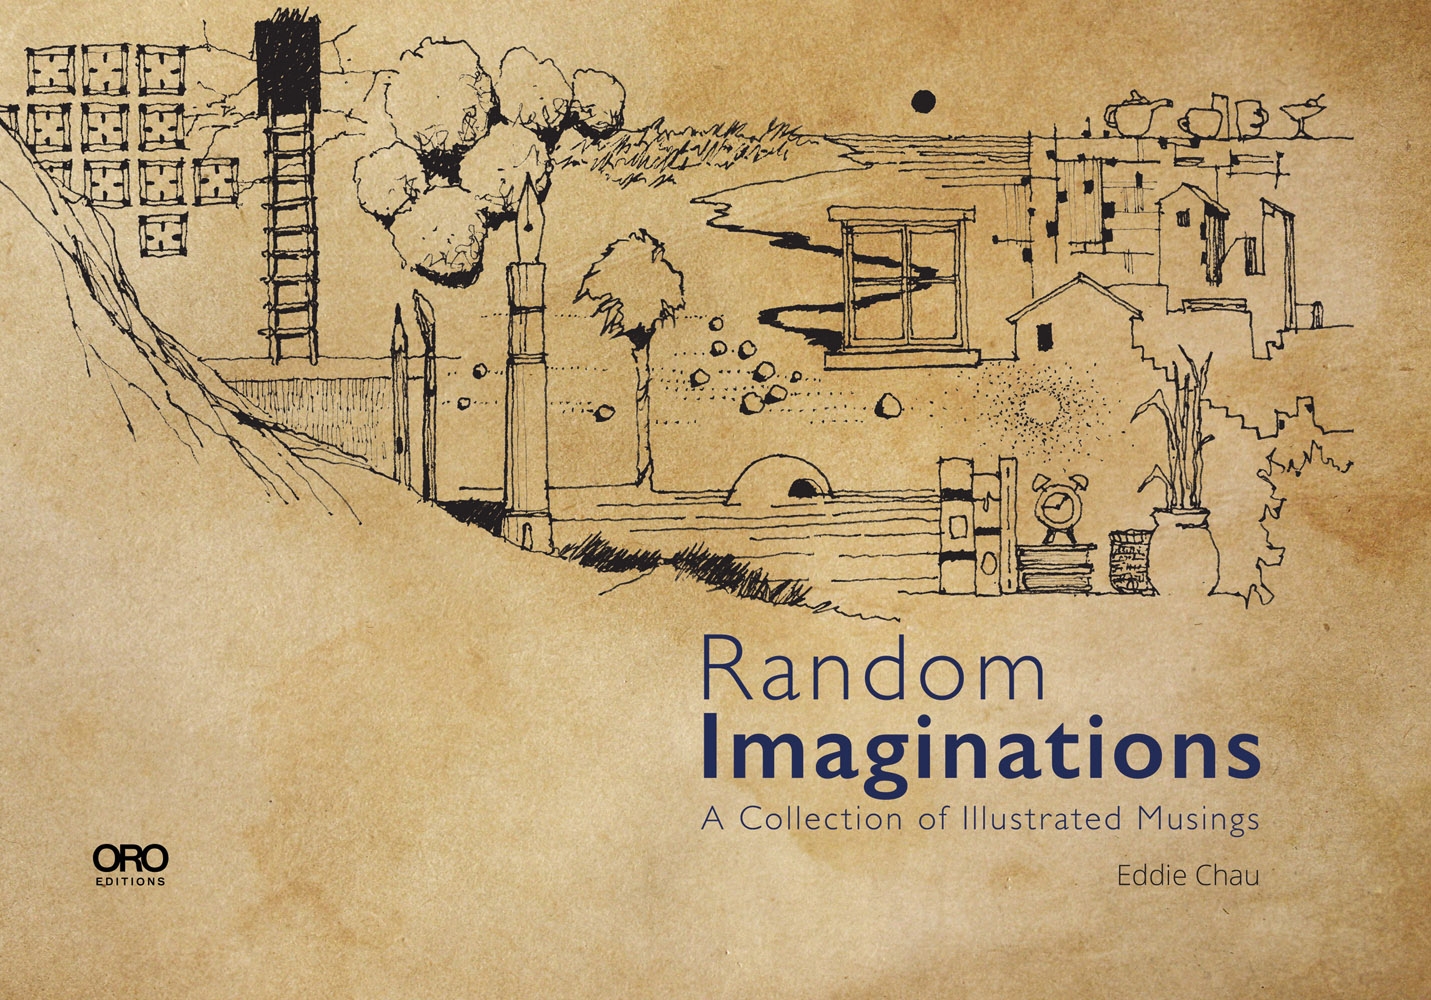 Architectural landscape sketch on sepia cover, Random Imaginations A Collection of Illustrated Musings in blue font to lower right